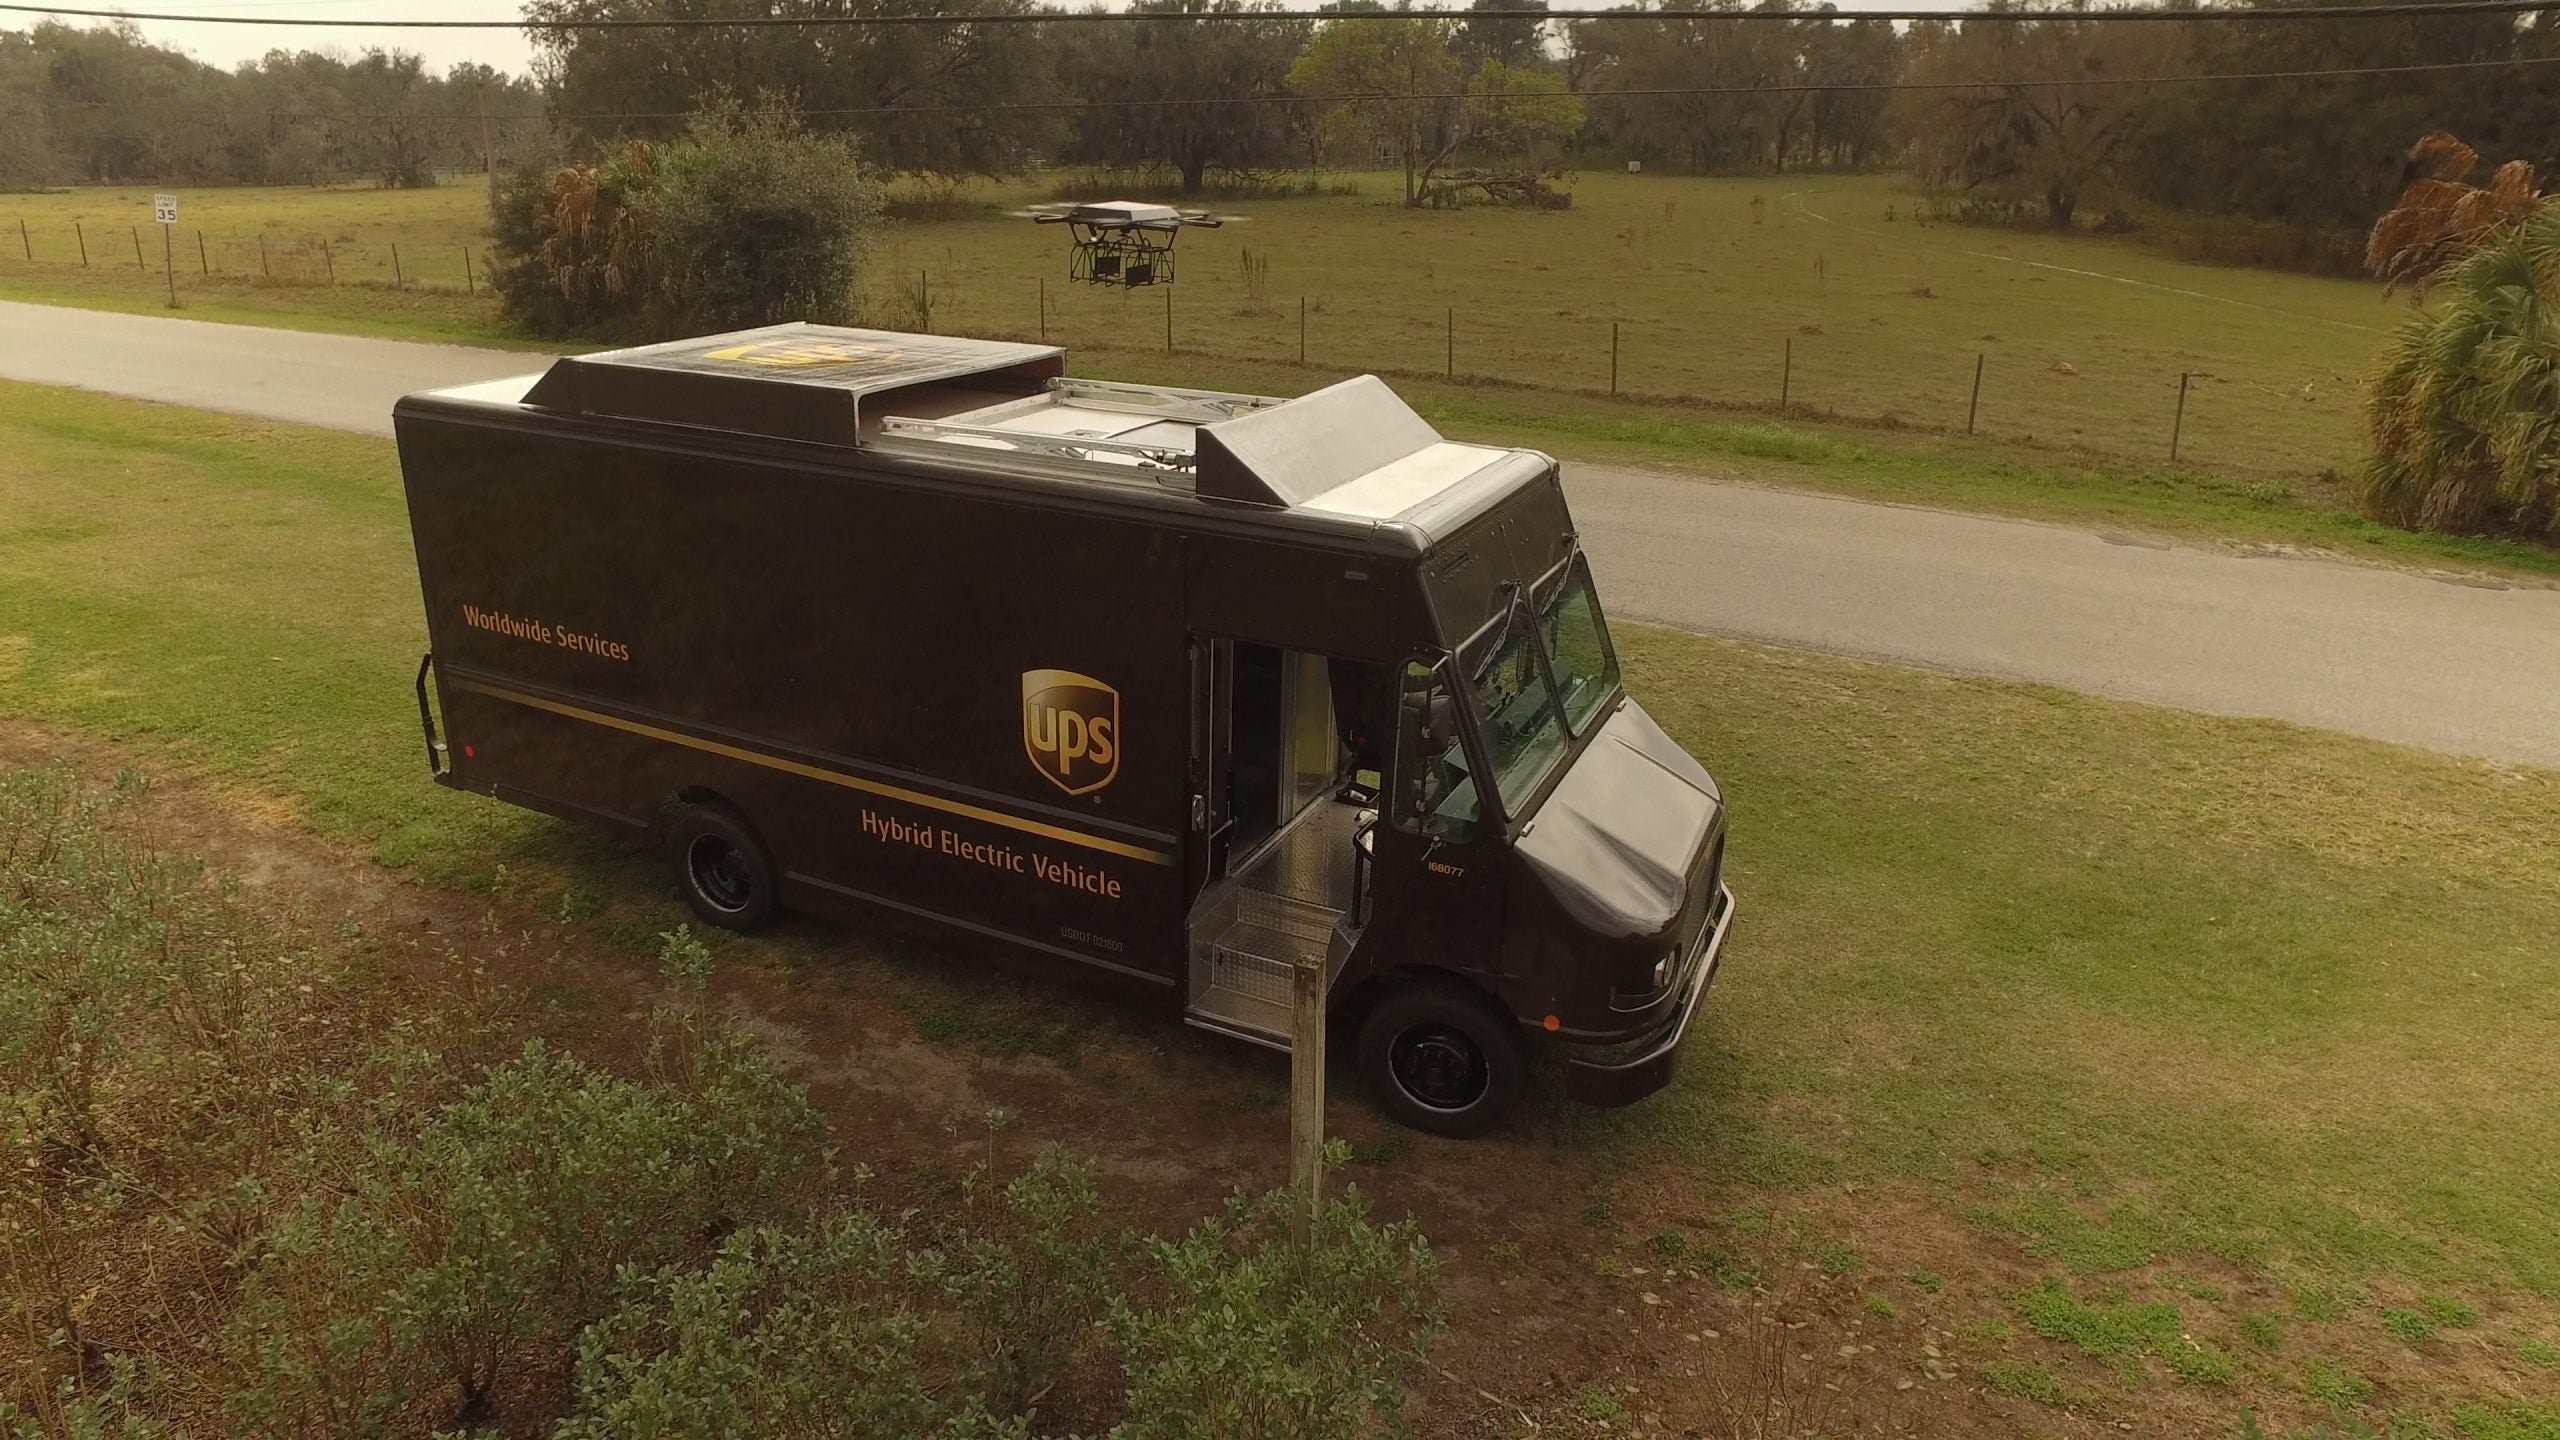 UPS Tests Drone Launched from a Delivery Truck